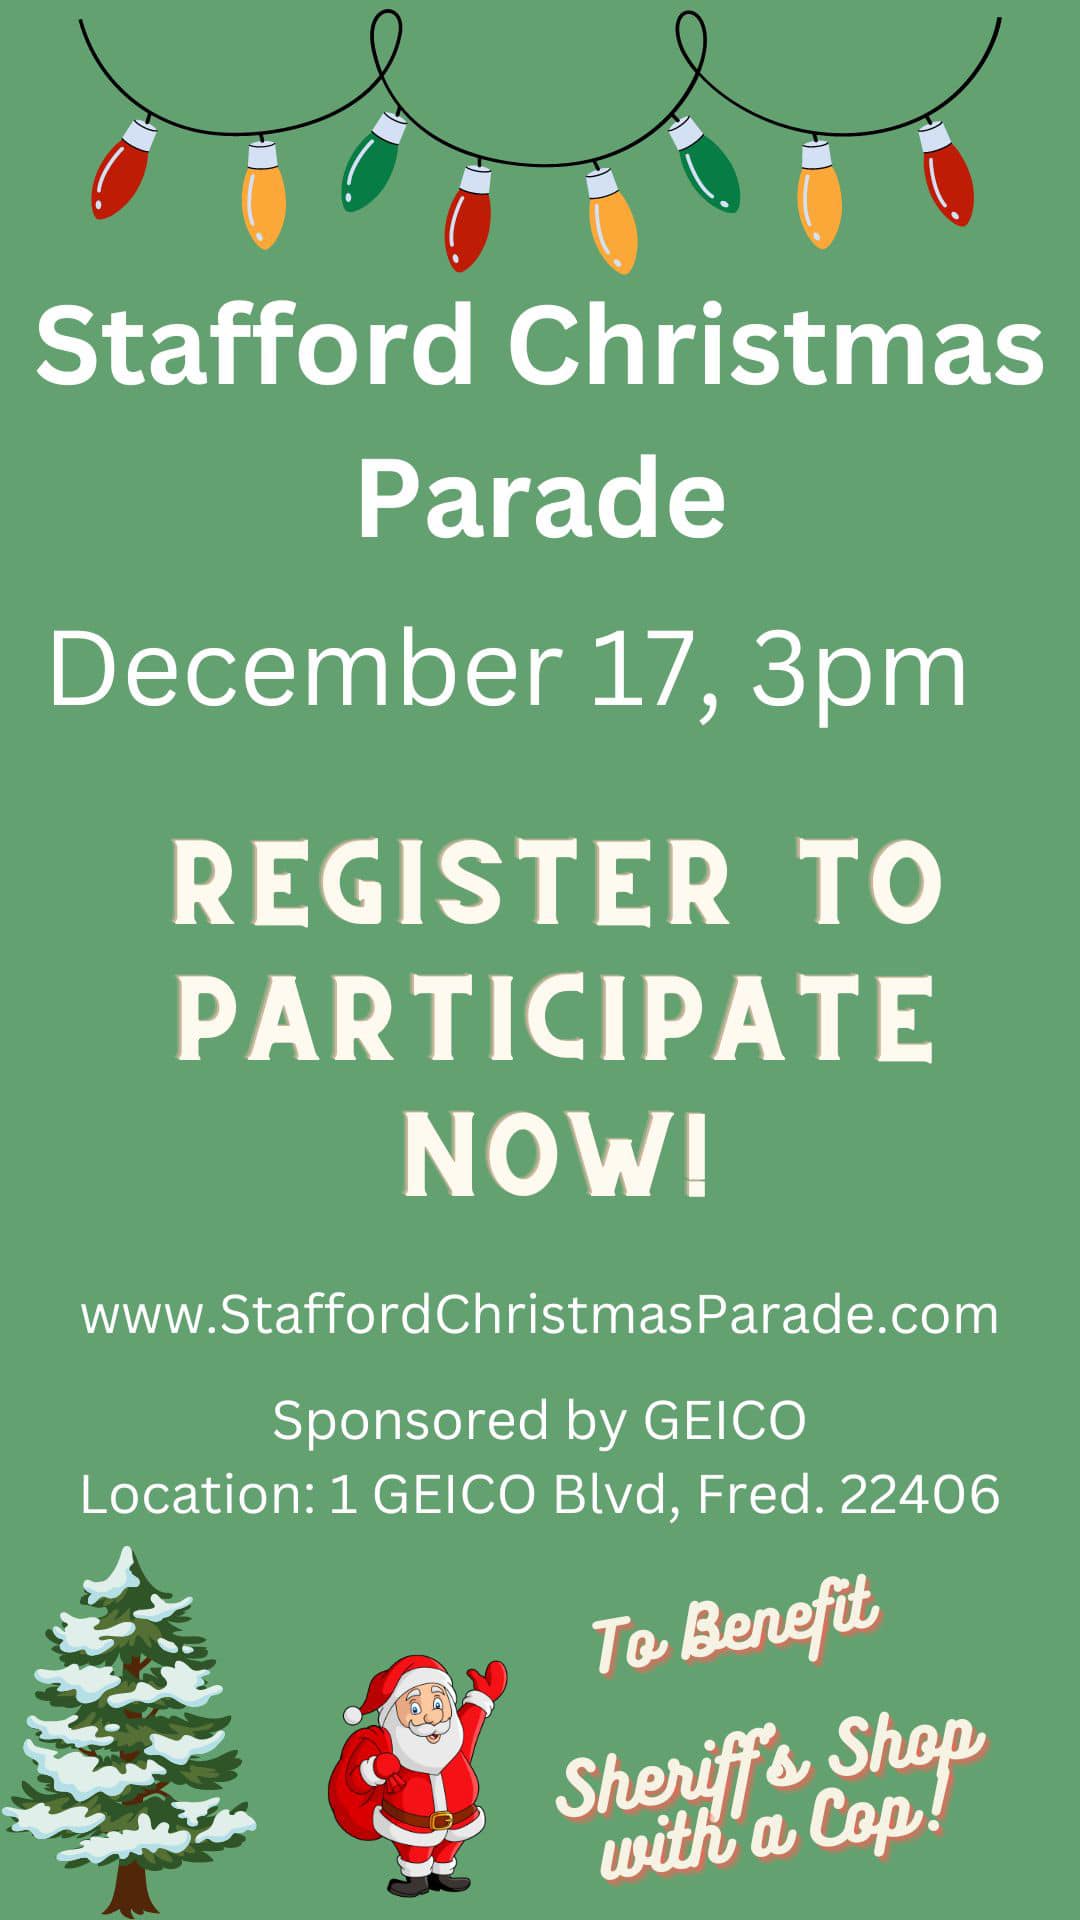 <h1 class="tribe-events-single-event-title">Stafford Christmas Parade Registration</h1>